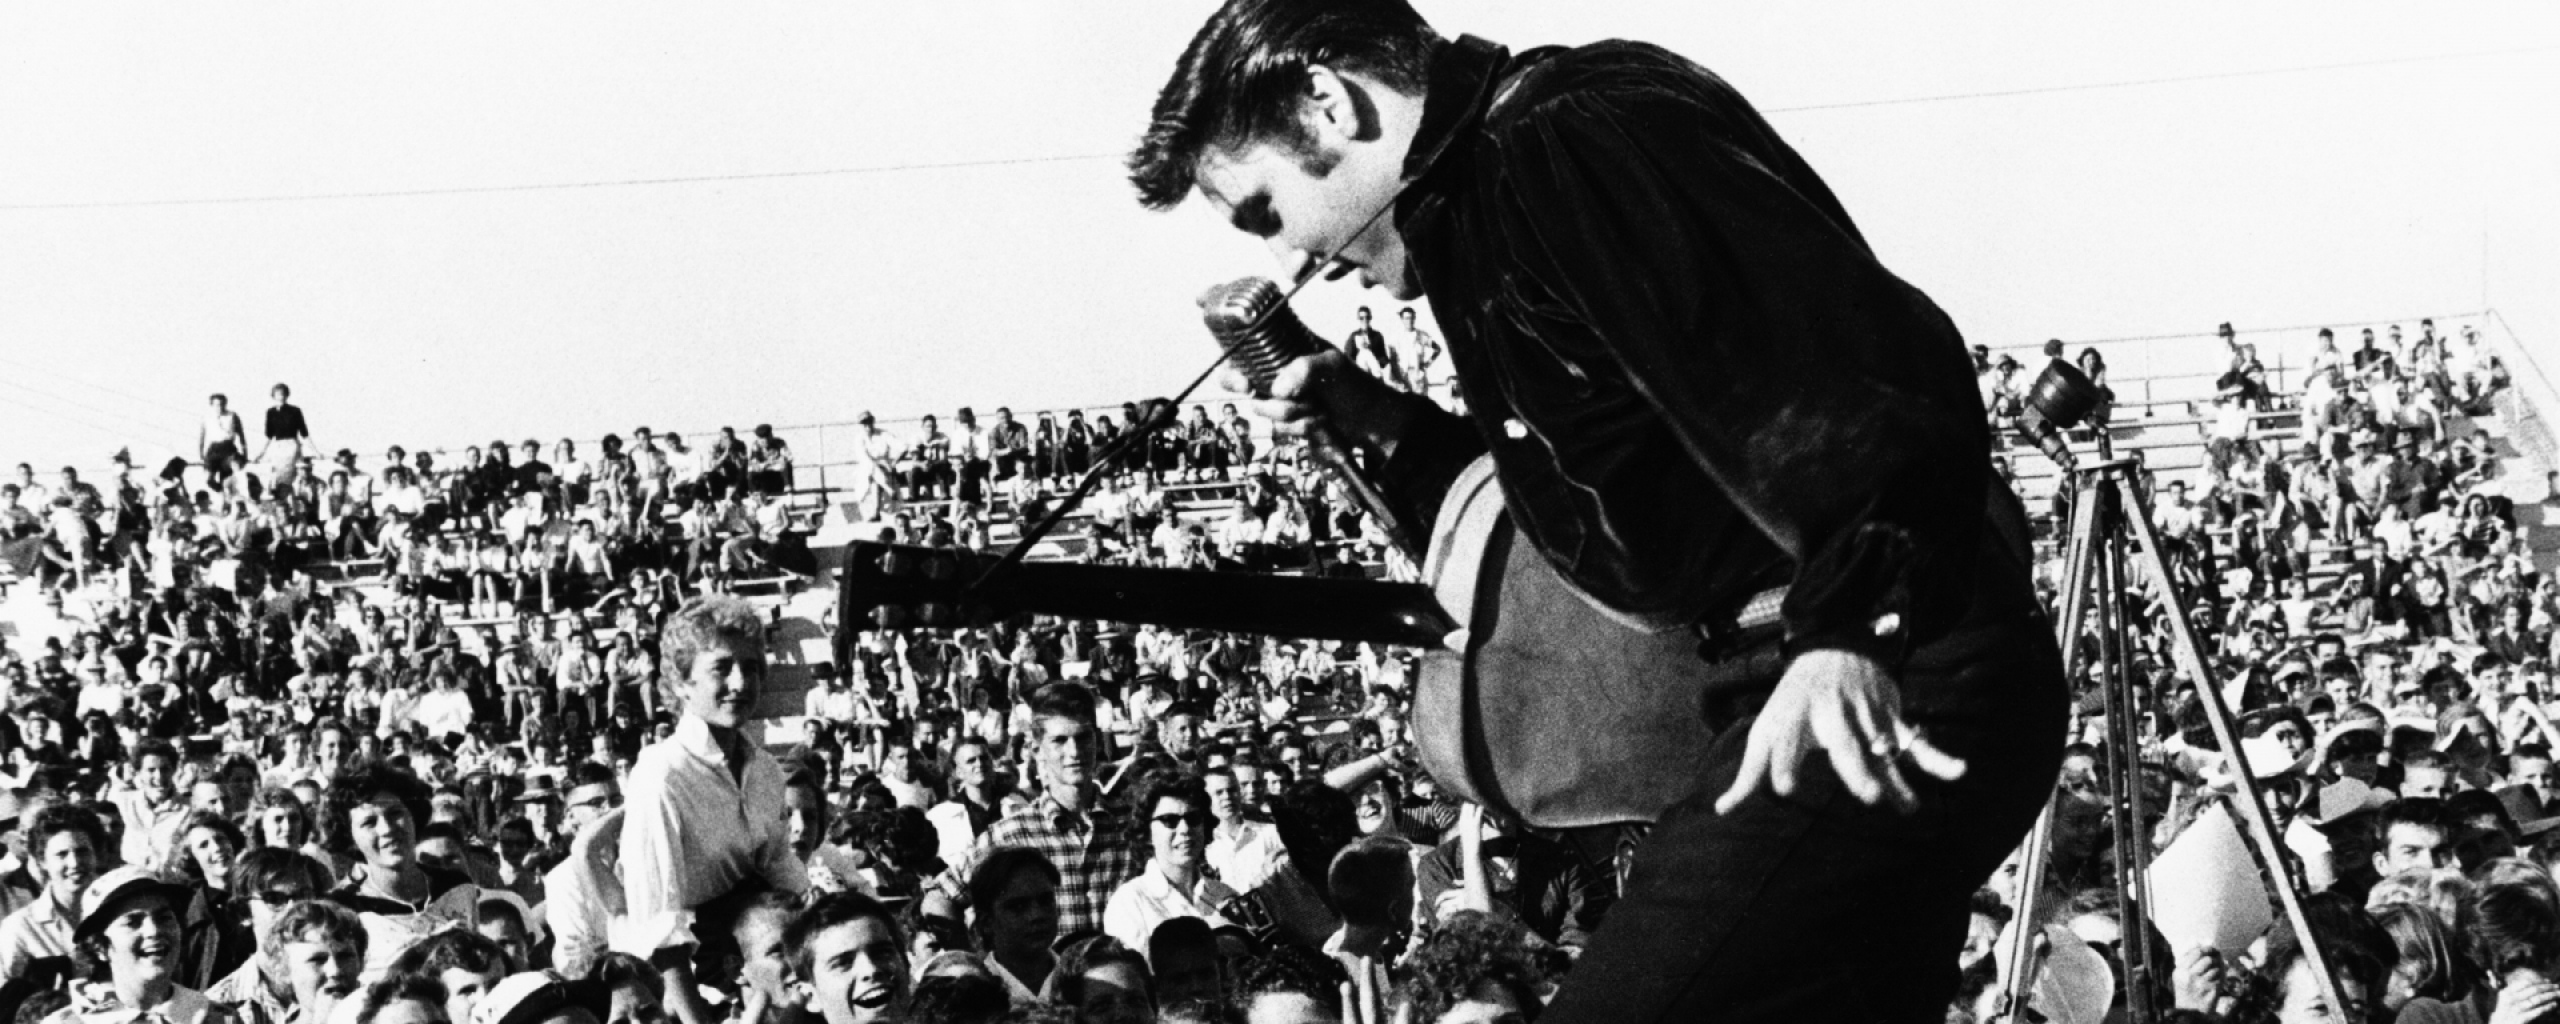 Elvis Presley Wallpaper High Resolution And Quality